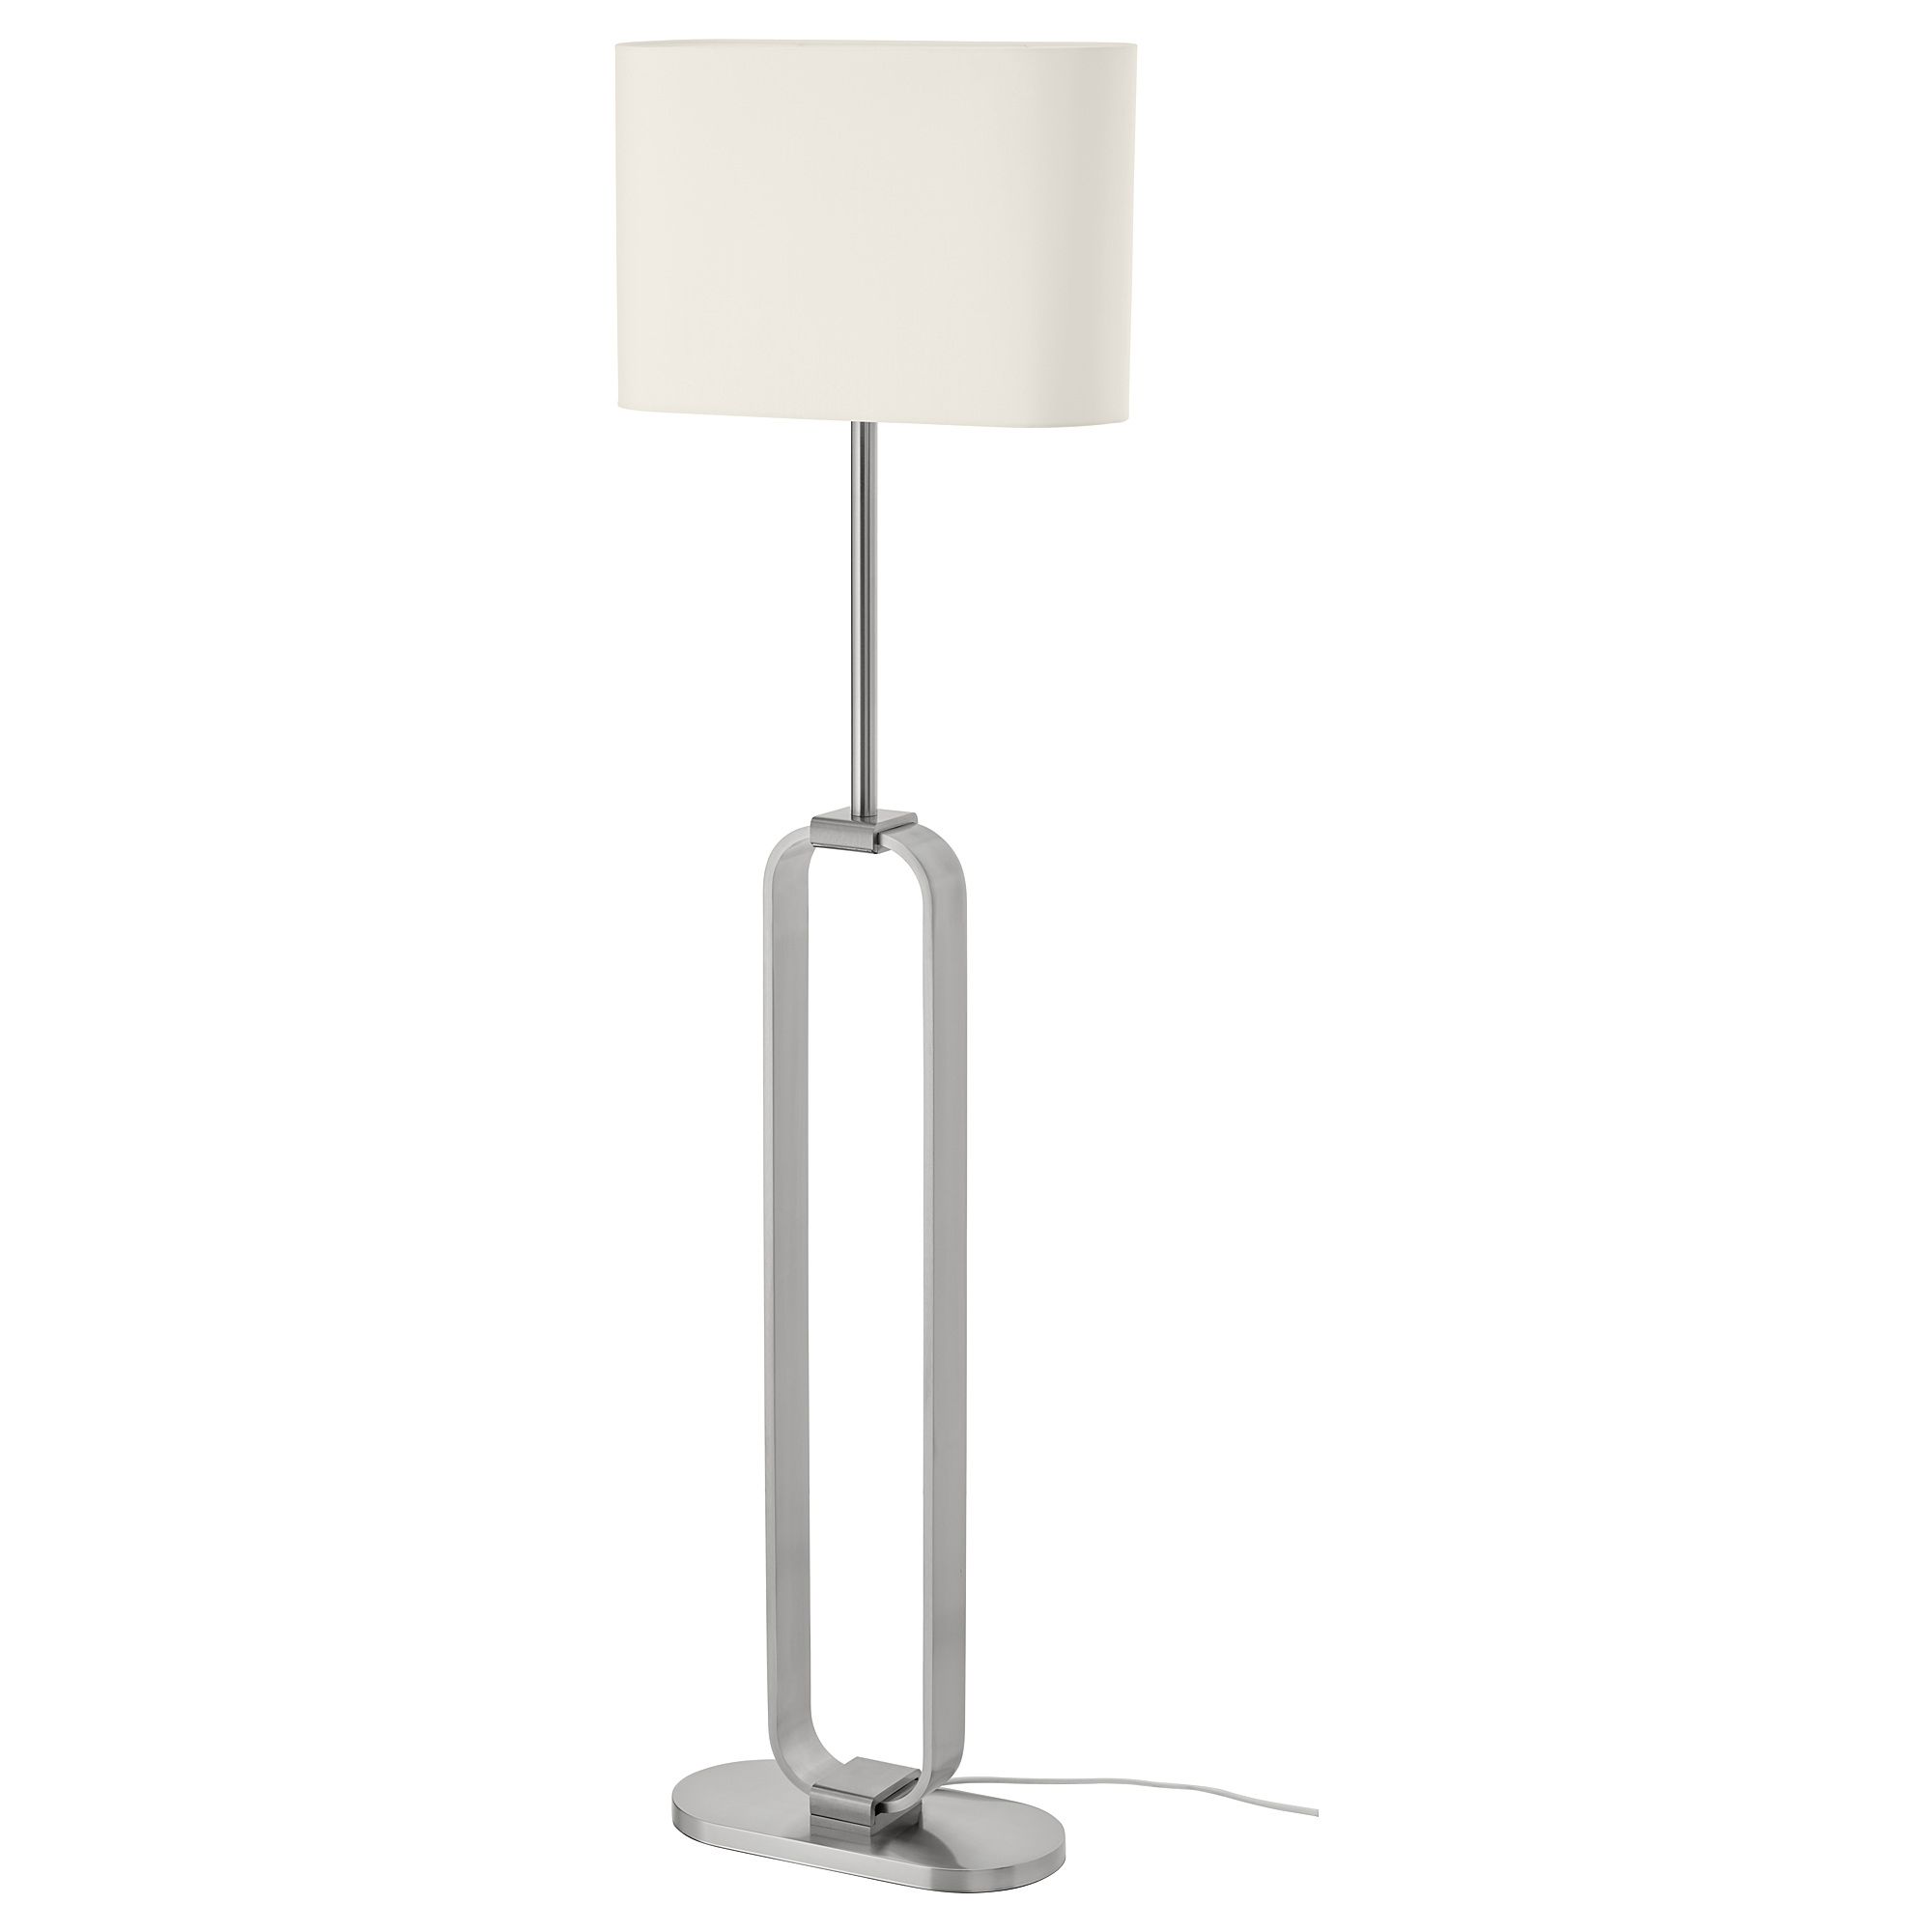 Uppvind Floor Lamp Nickel Plated/white 150 Cm | Ikea Lietuva With White Shade Floor Lamps (View 7 of 15)